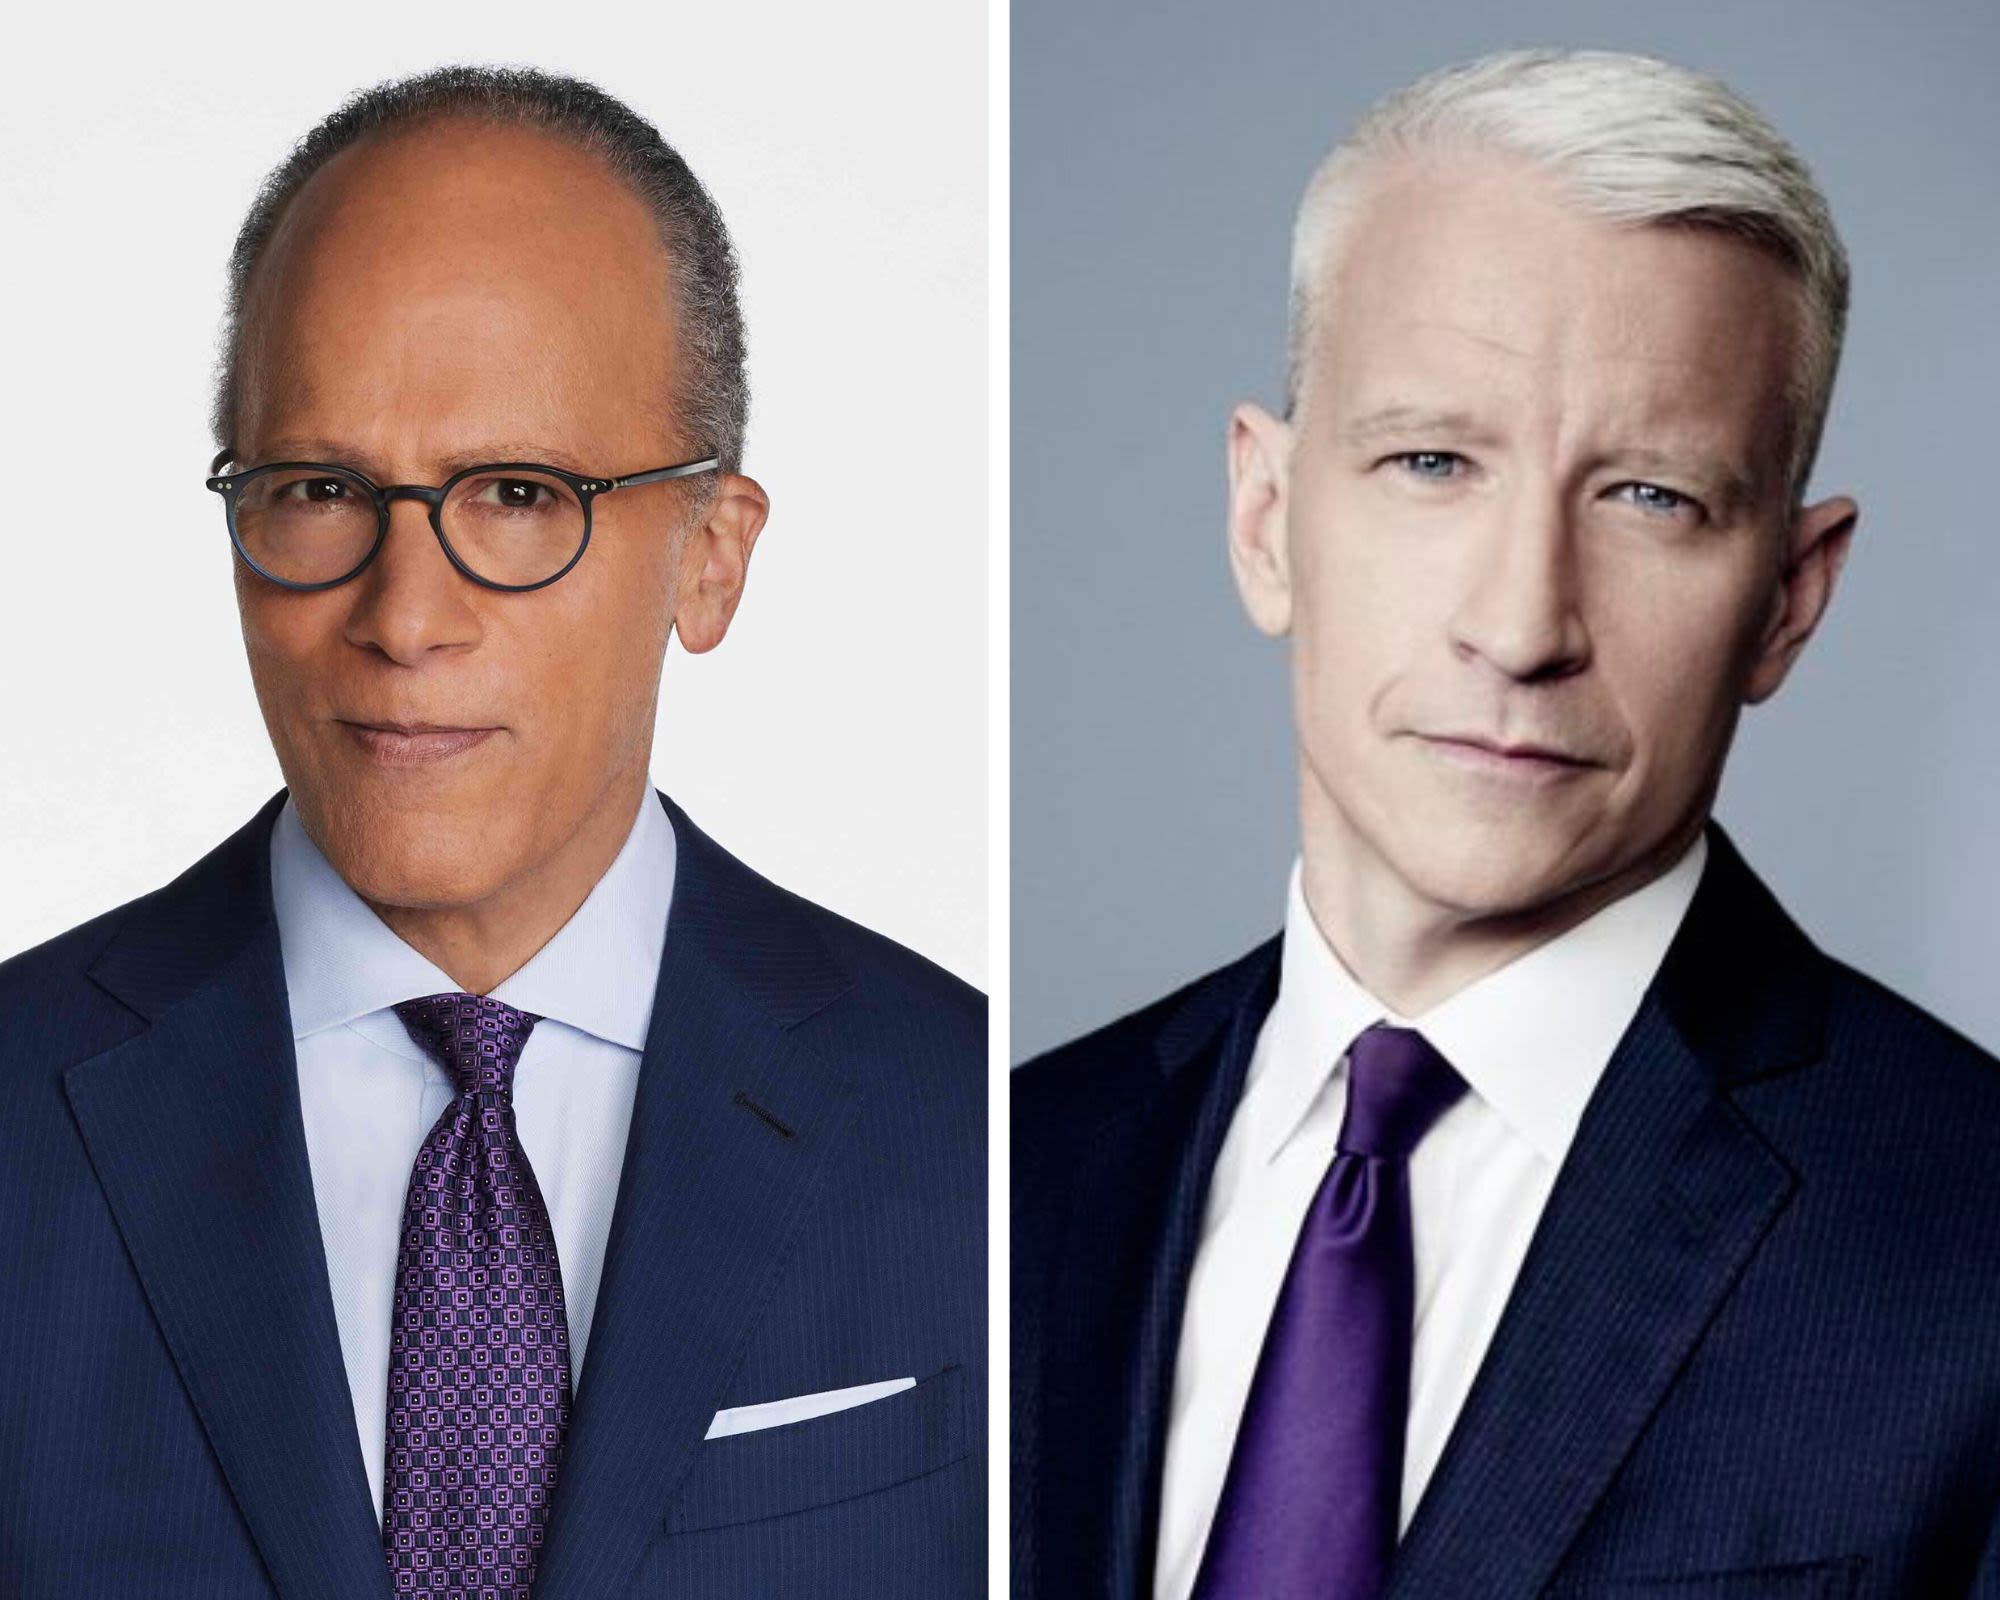 Lester Holt and Anderson Cooper Are America’s Most Trusted Newsers Per New Poll